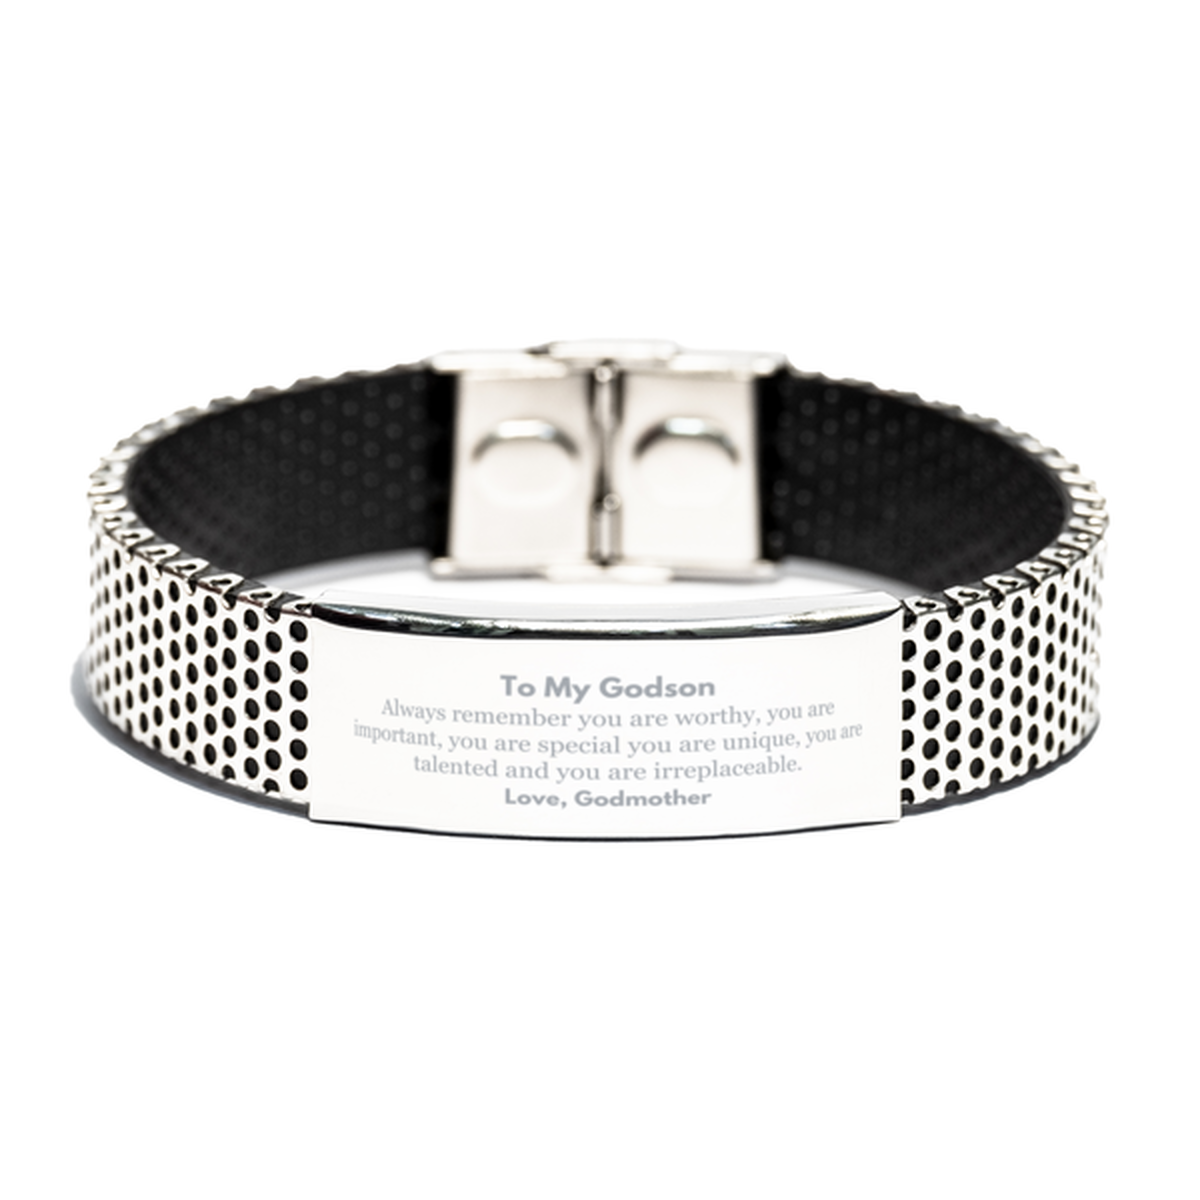 Godson Birthday Gifts from Godmother, Inspirational Stainless Steel Bracelet for Godson Christmas Graduation Gifts for Godson Always remember you are worthy, you are important. Love, Godmother